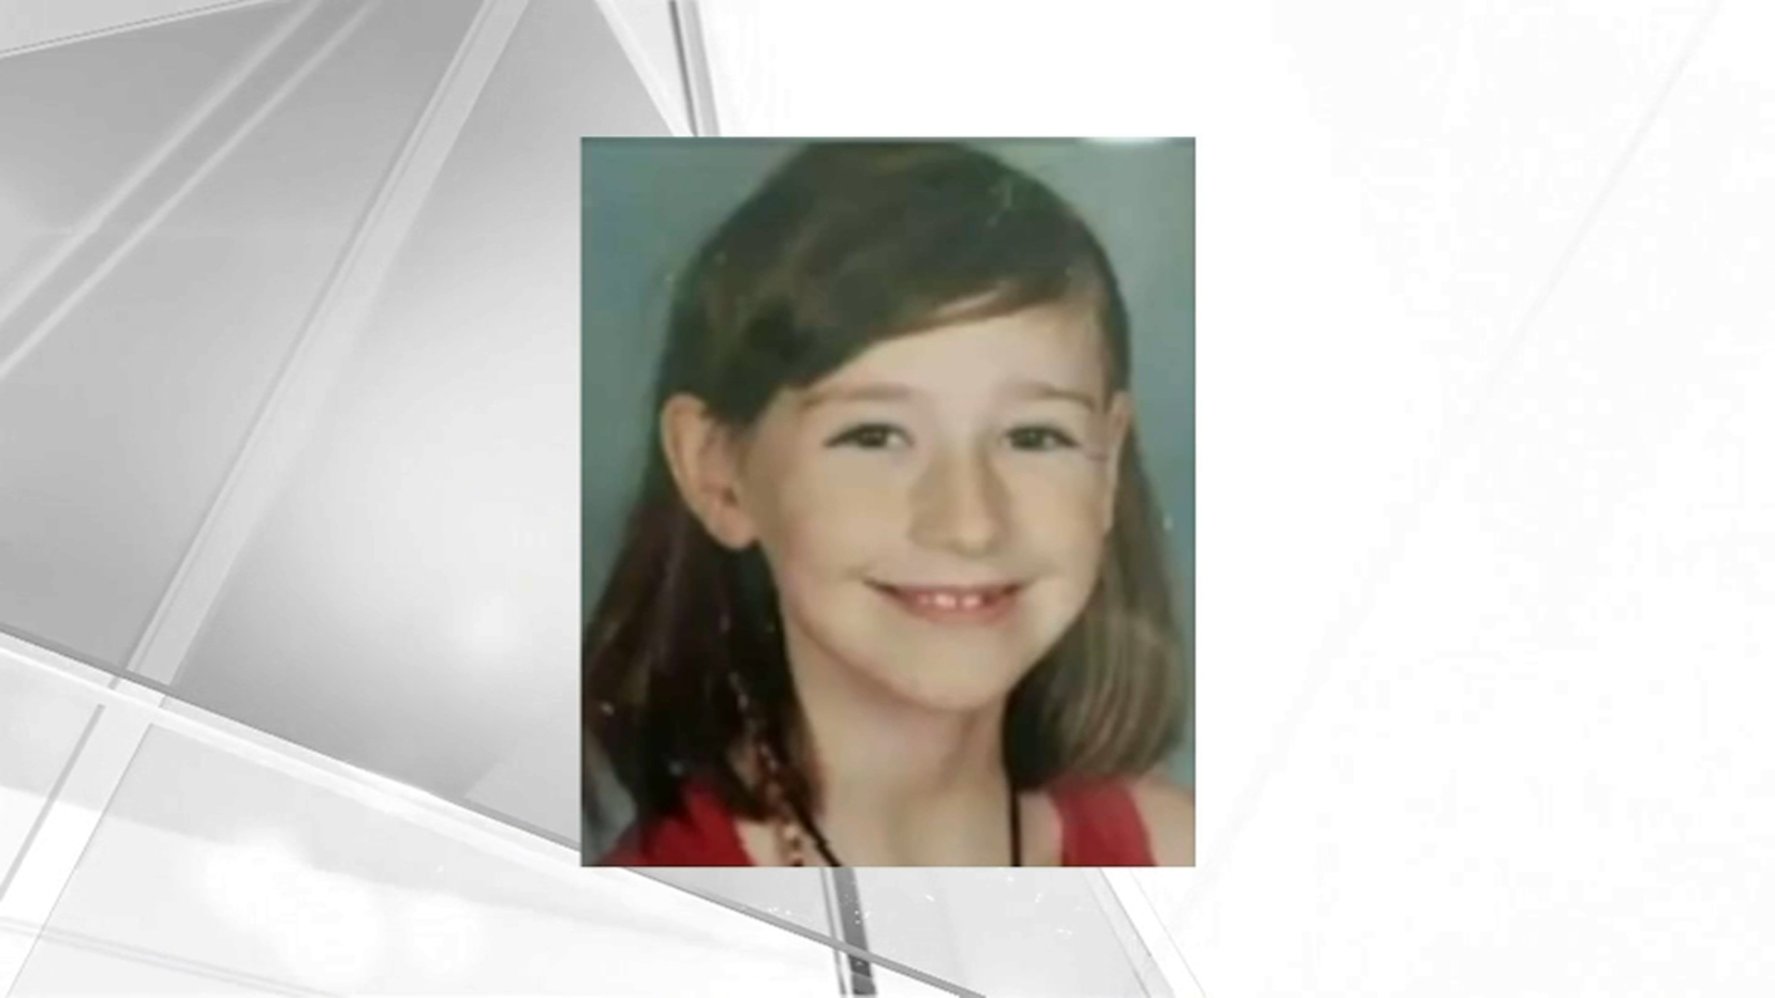 Ashes Of 8 Year Old Killed In Calif Stolen From Father Nbc10 7595